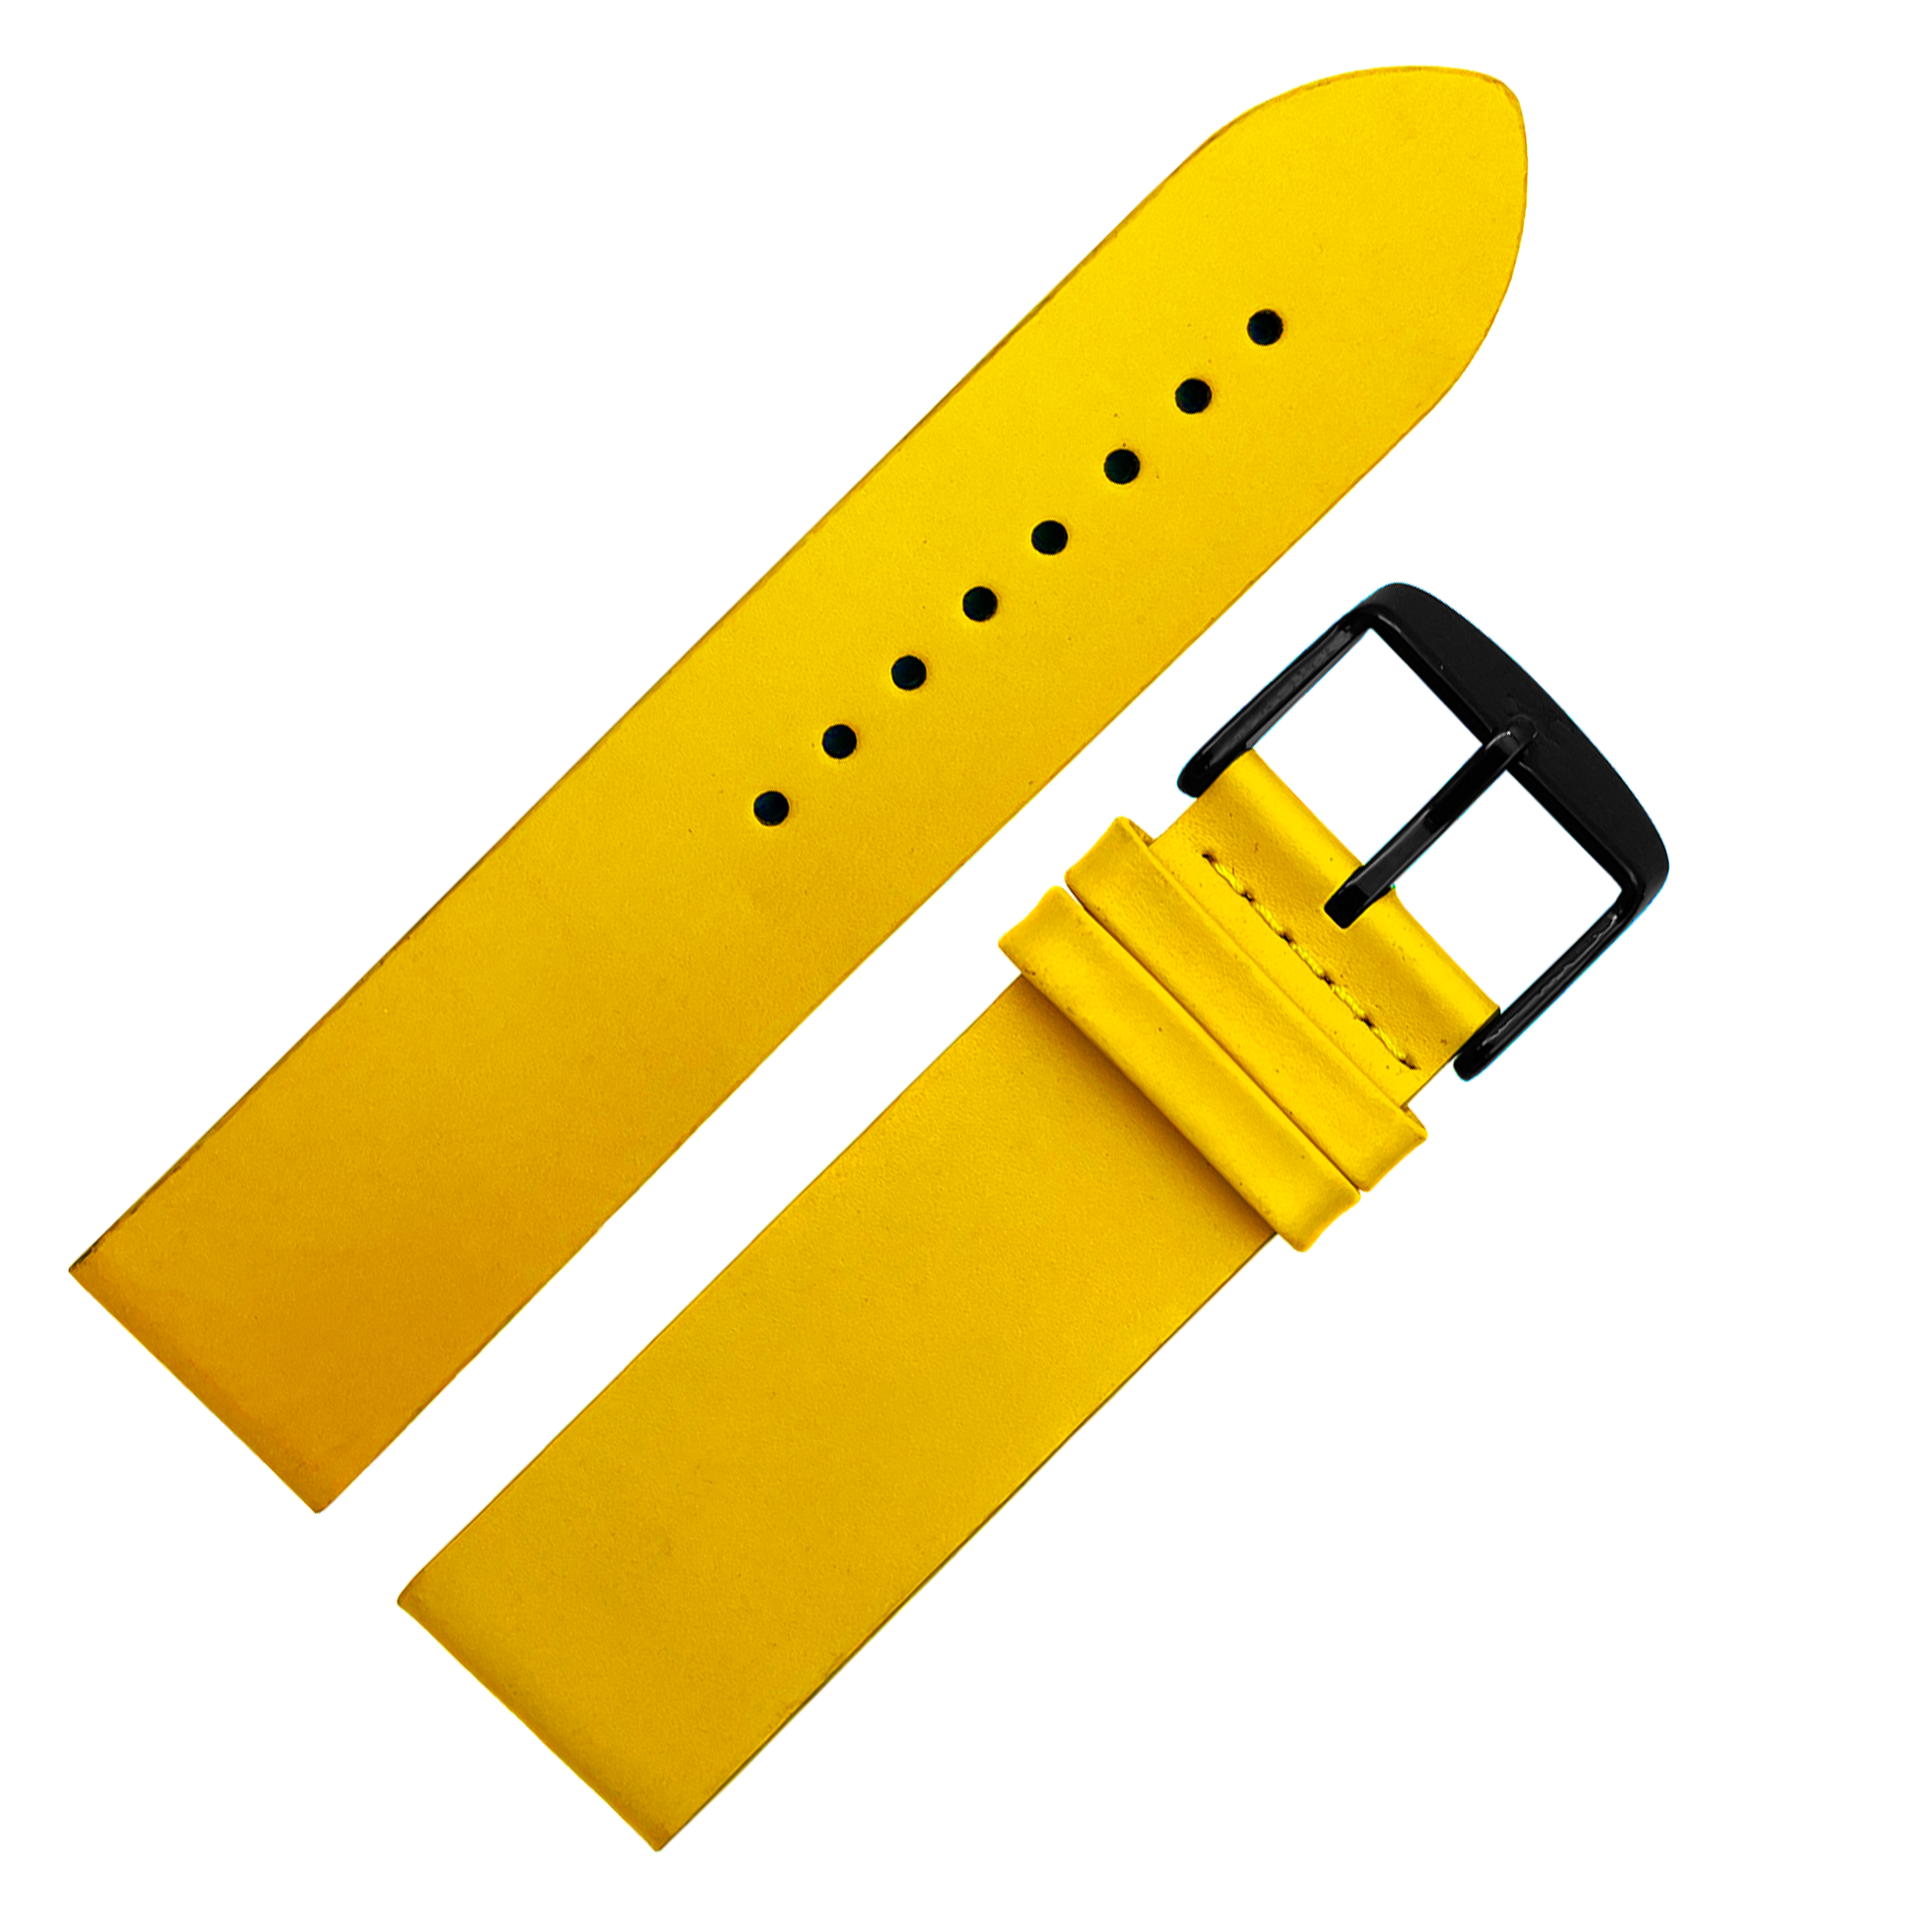 Interchangeable Watch Straps & Bands In Leather, Nylon, Rubber & more